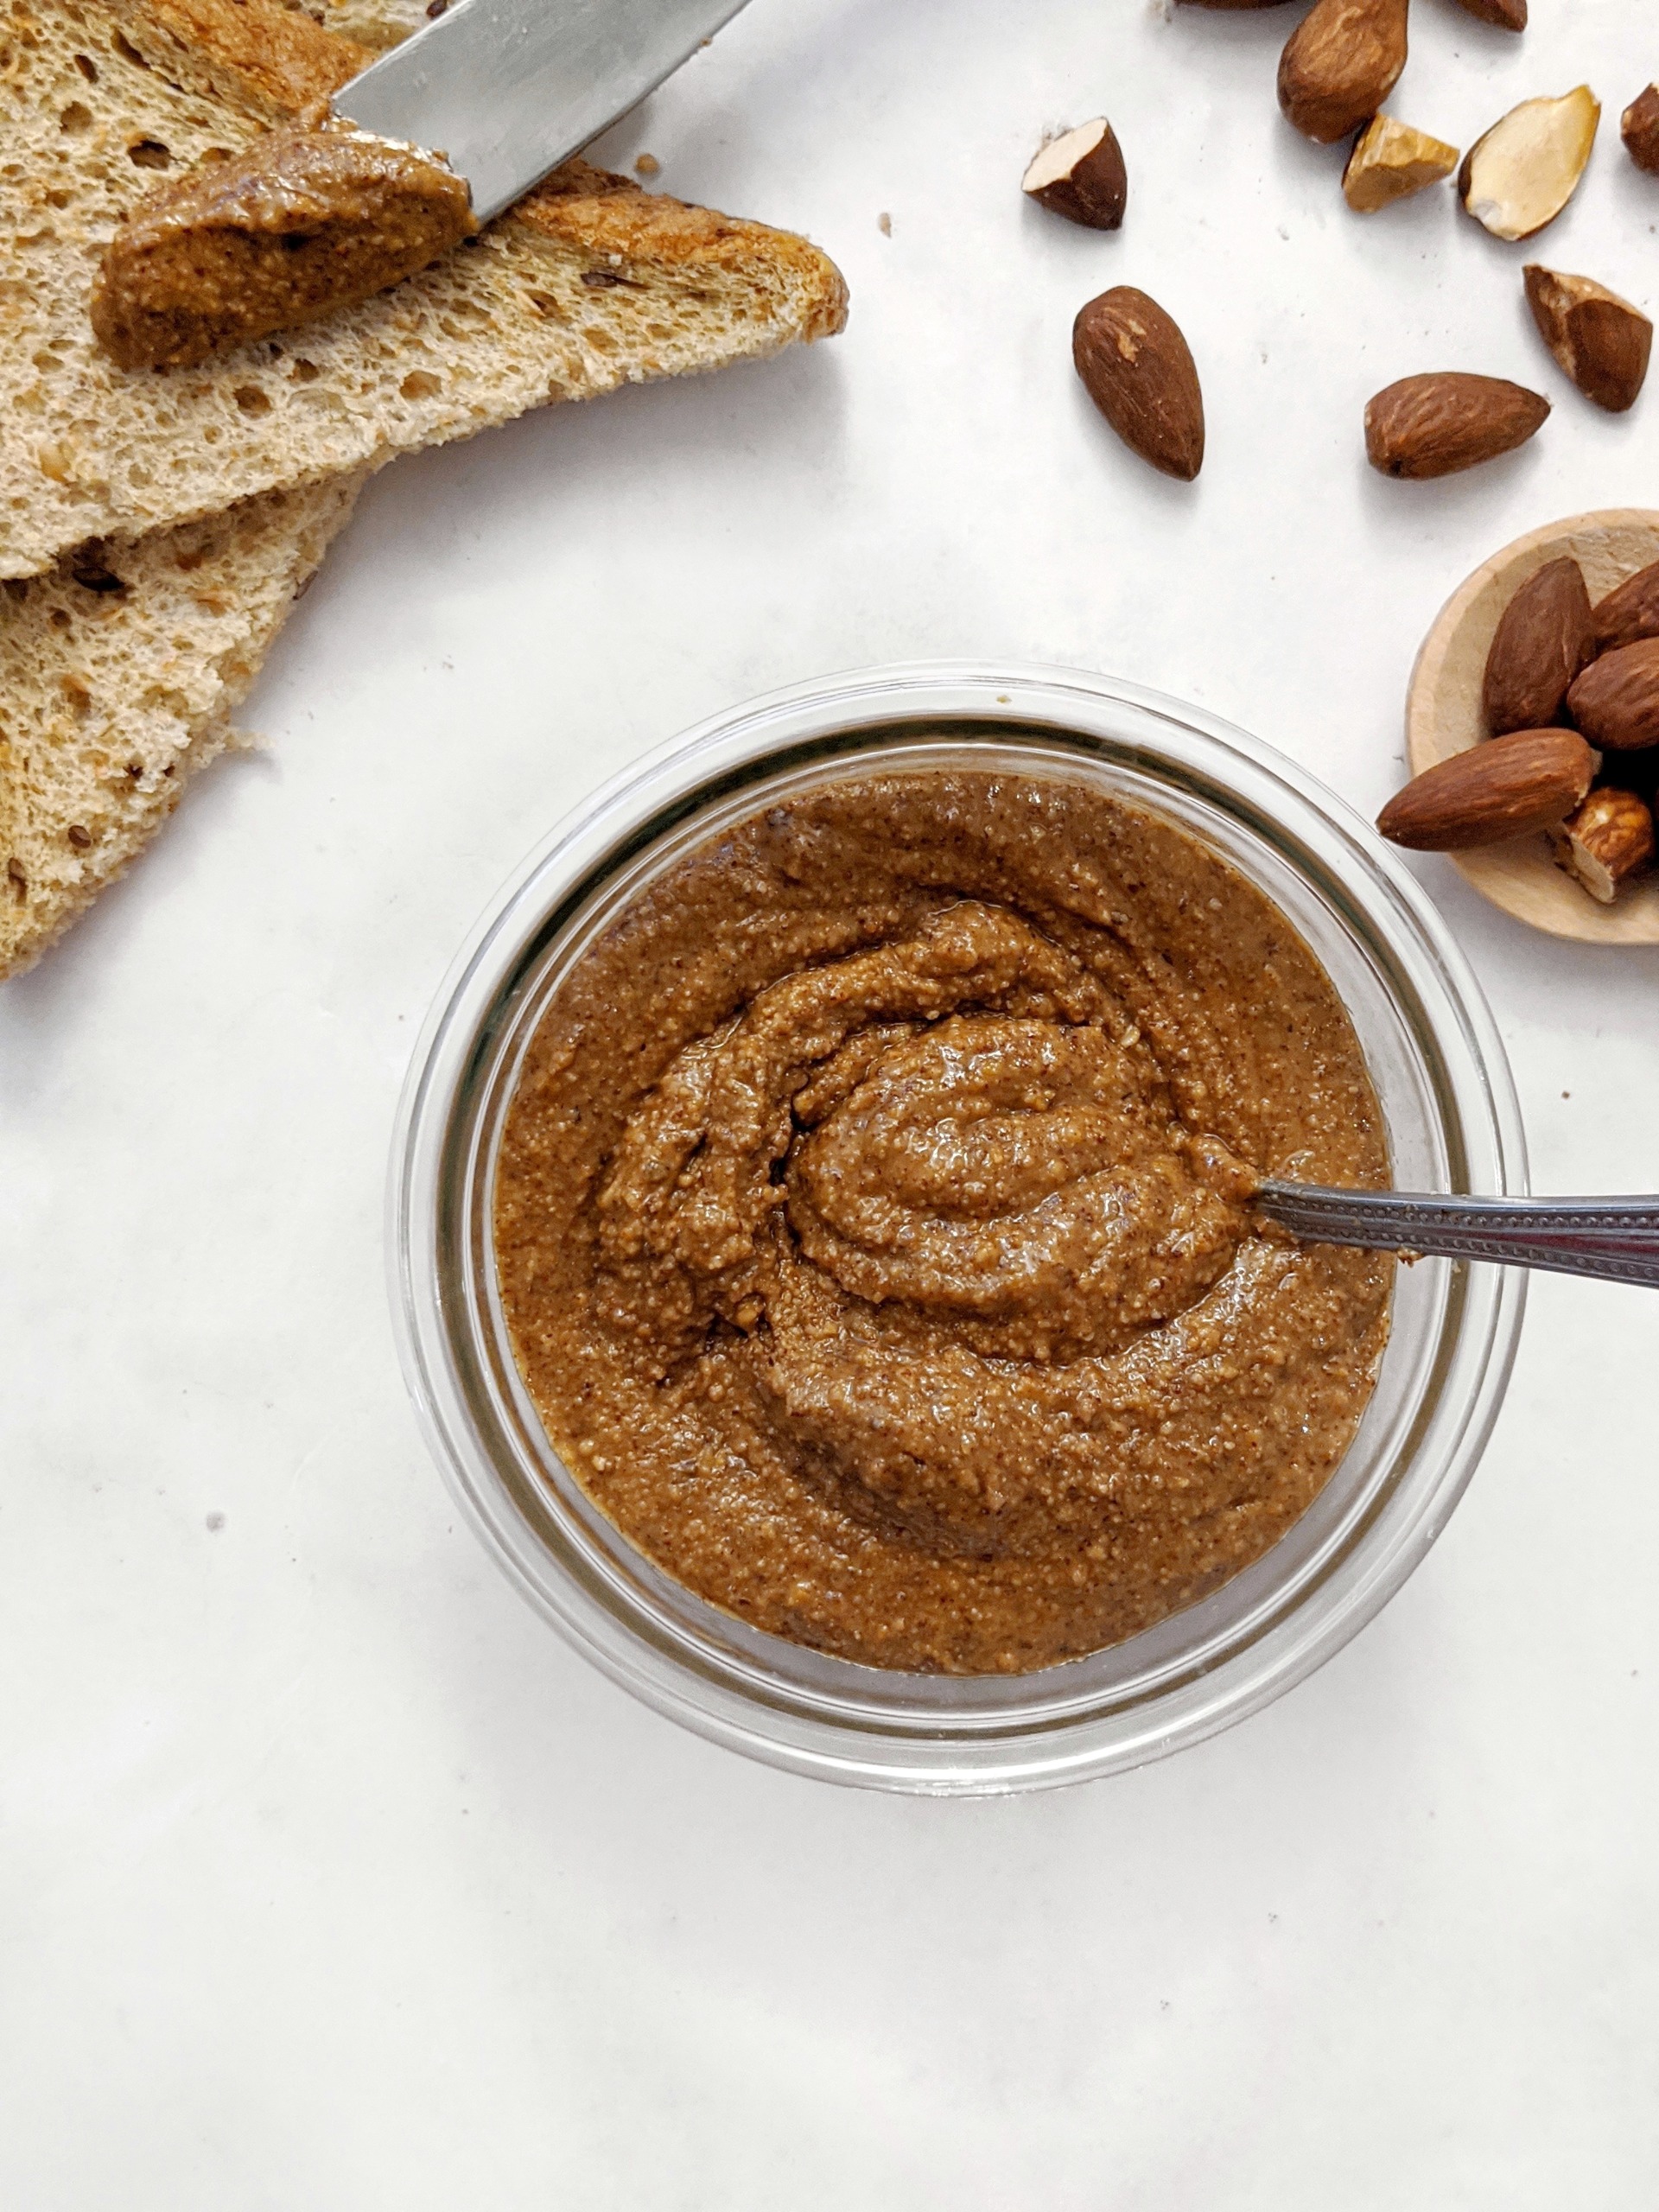 Homemade Creamy Roasted Almond Butter (No Oil)